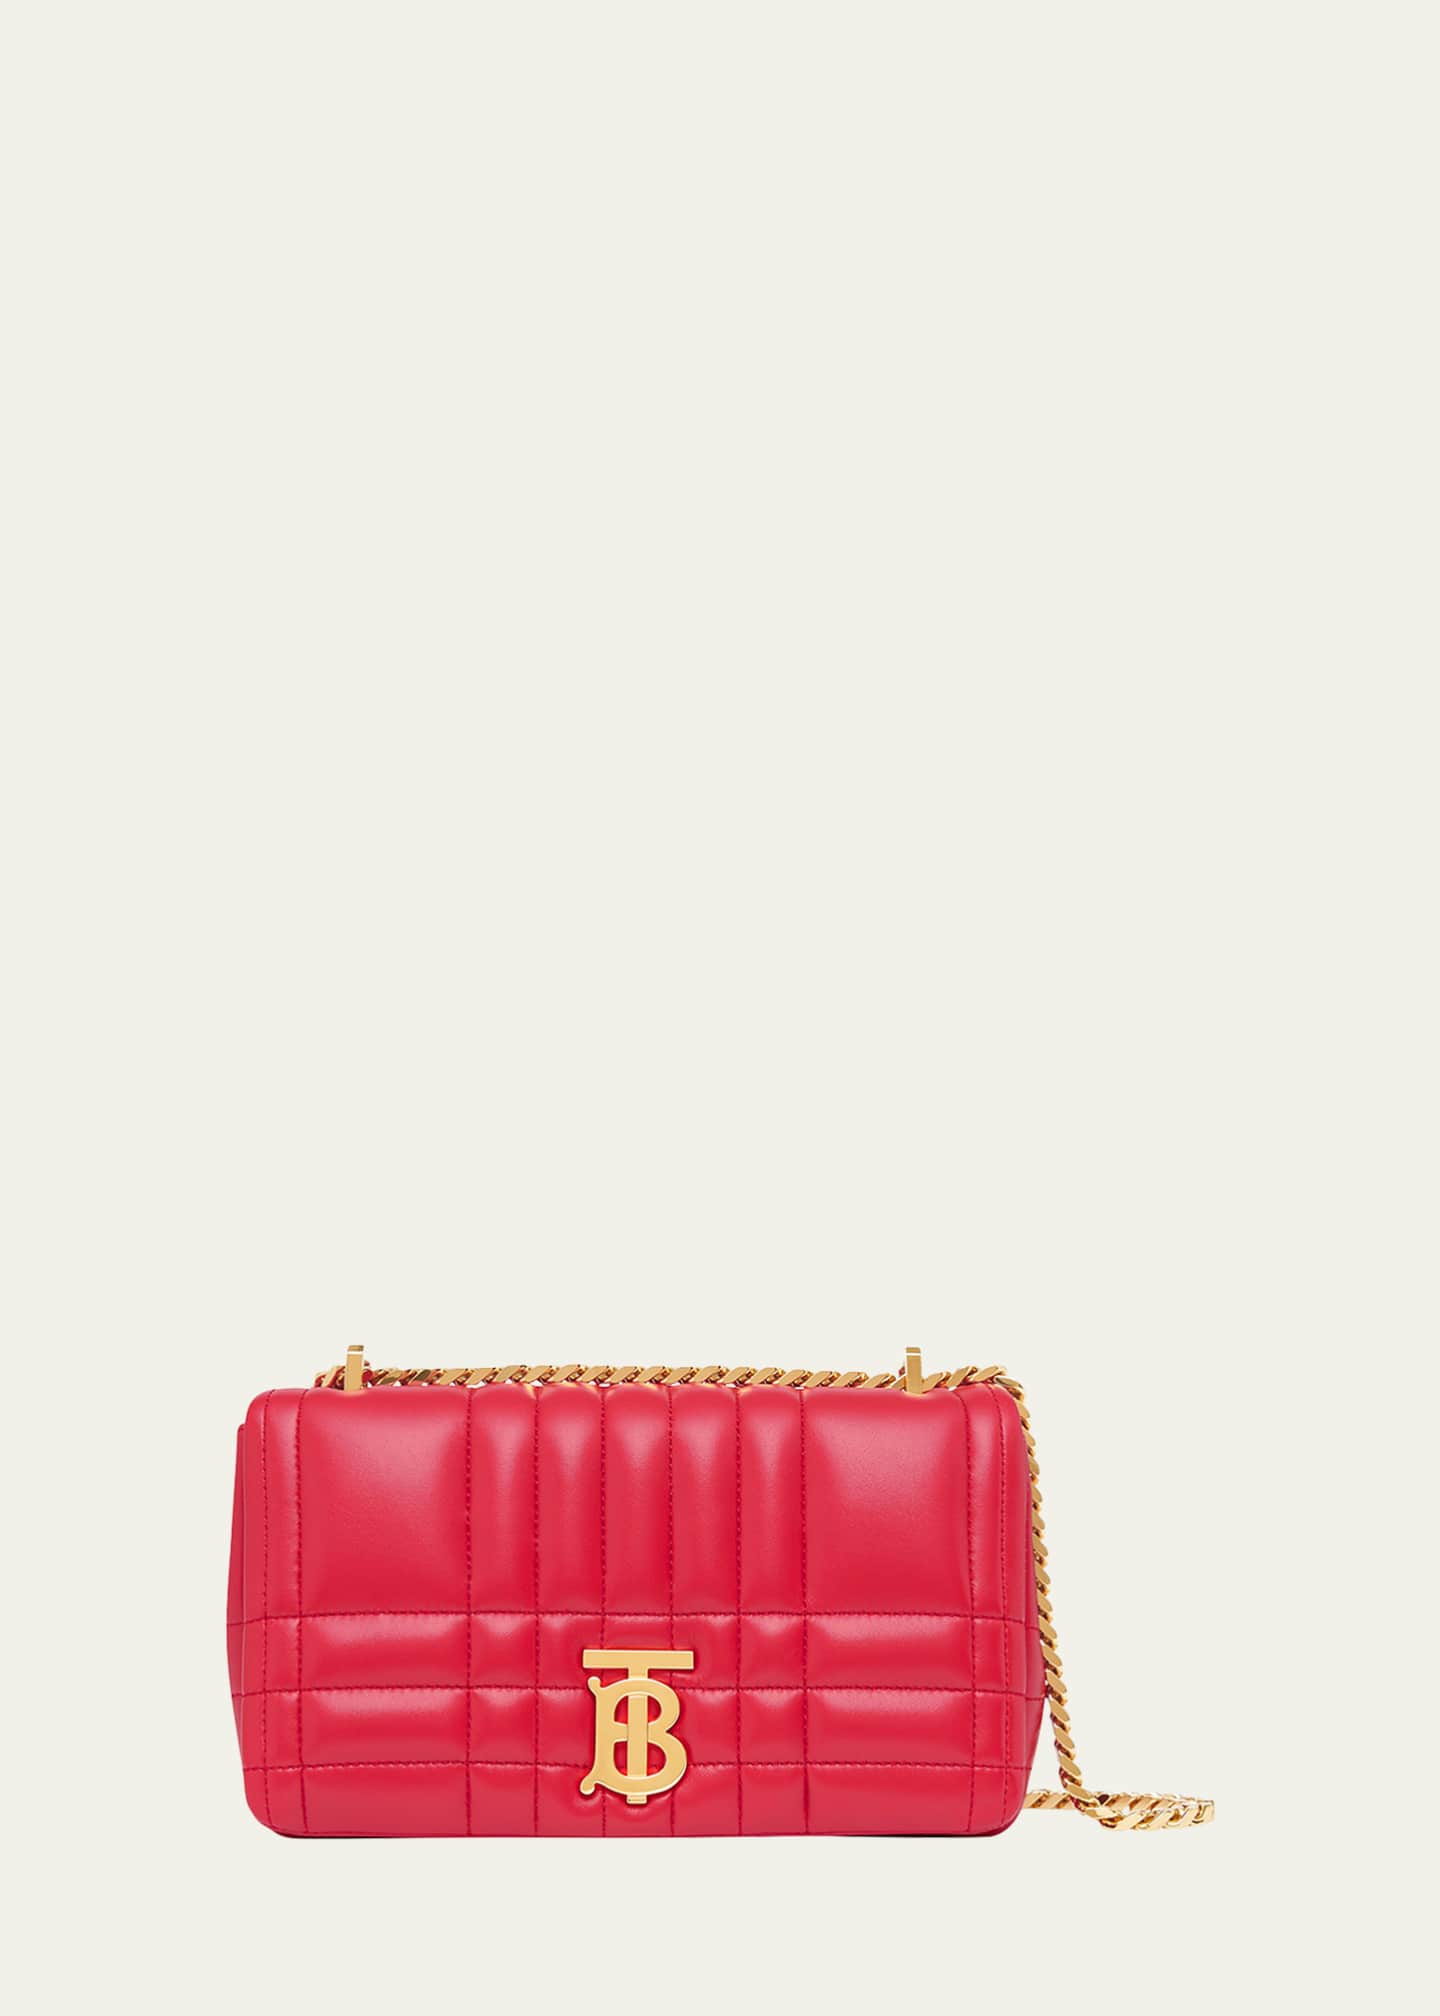 Burberry Lola Small Leather Shoulder Bag